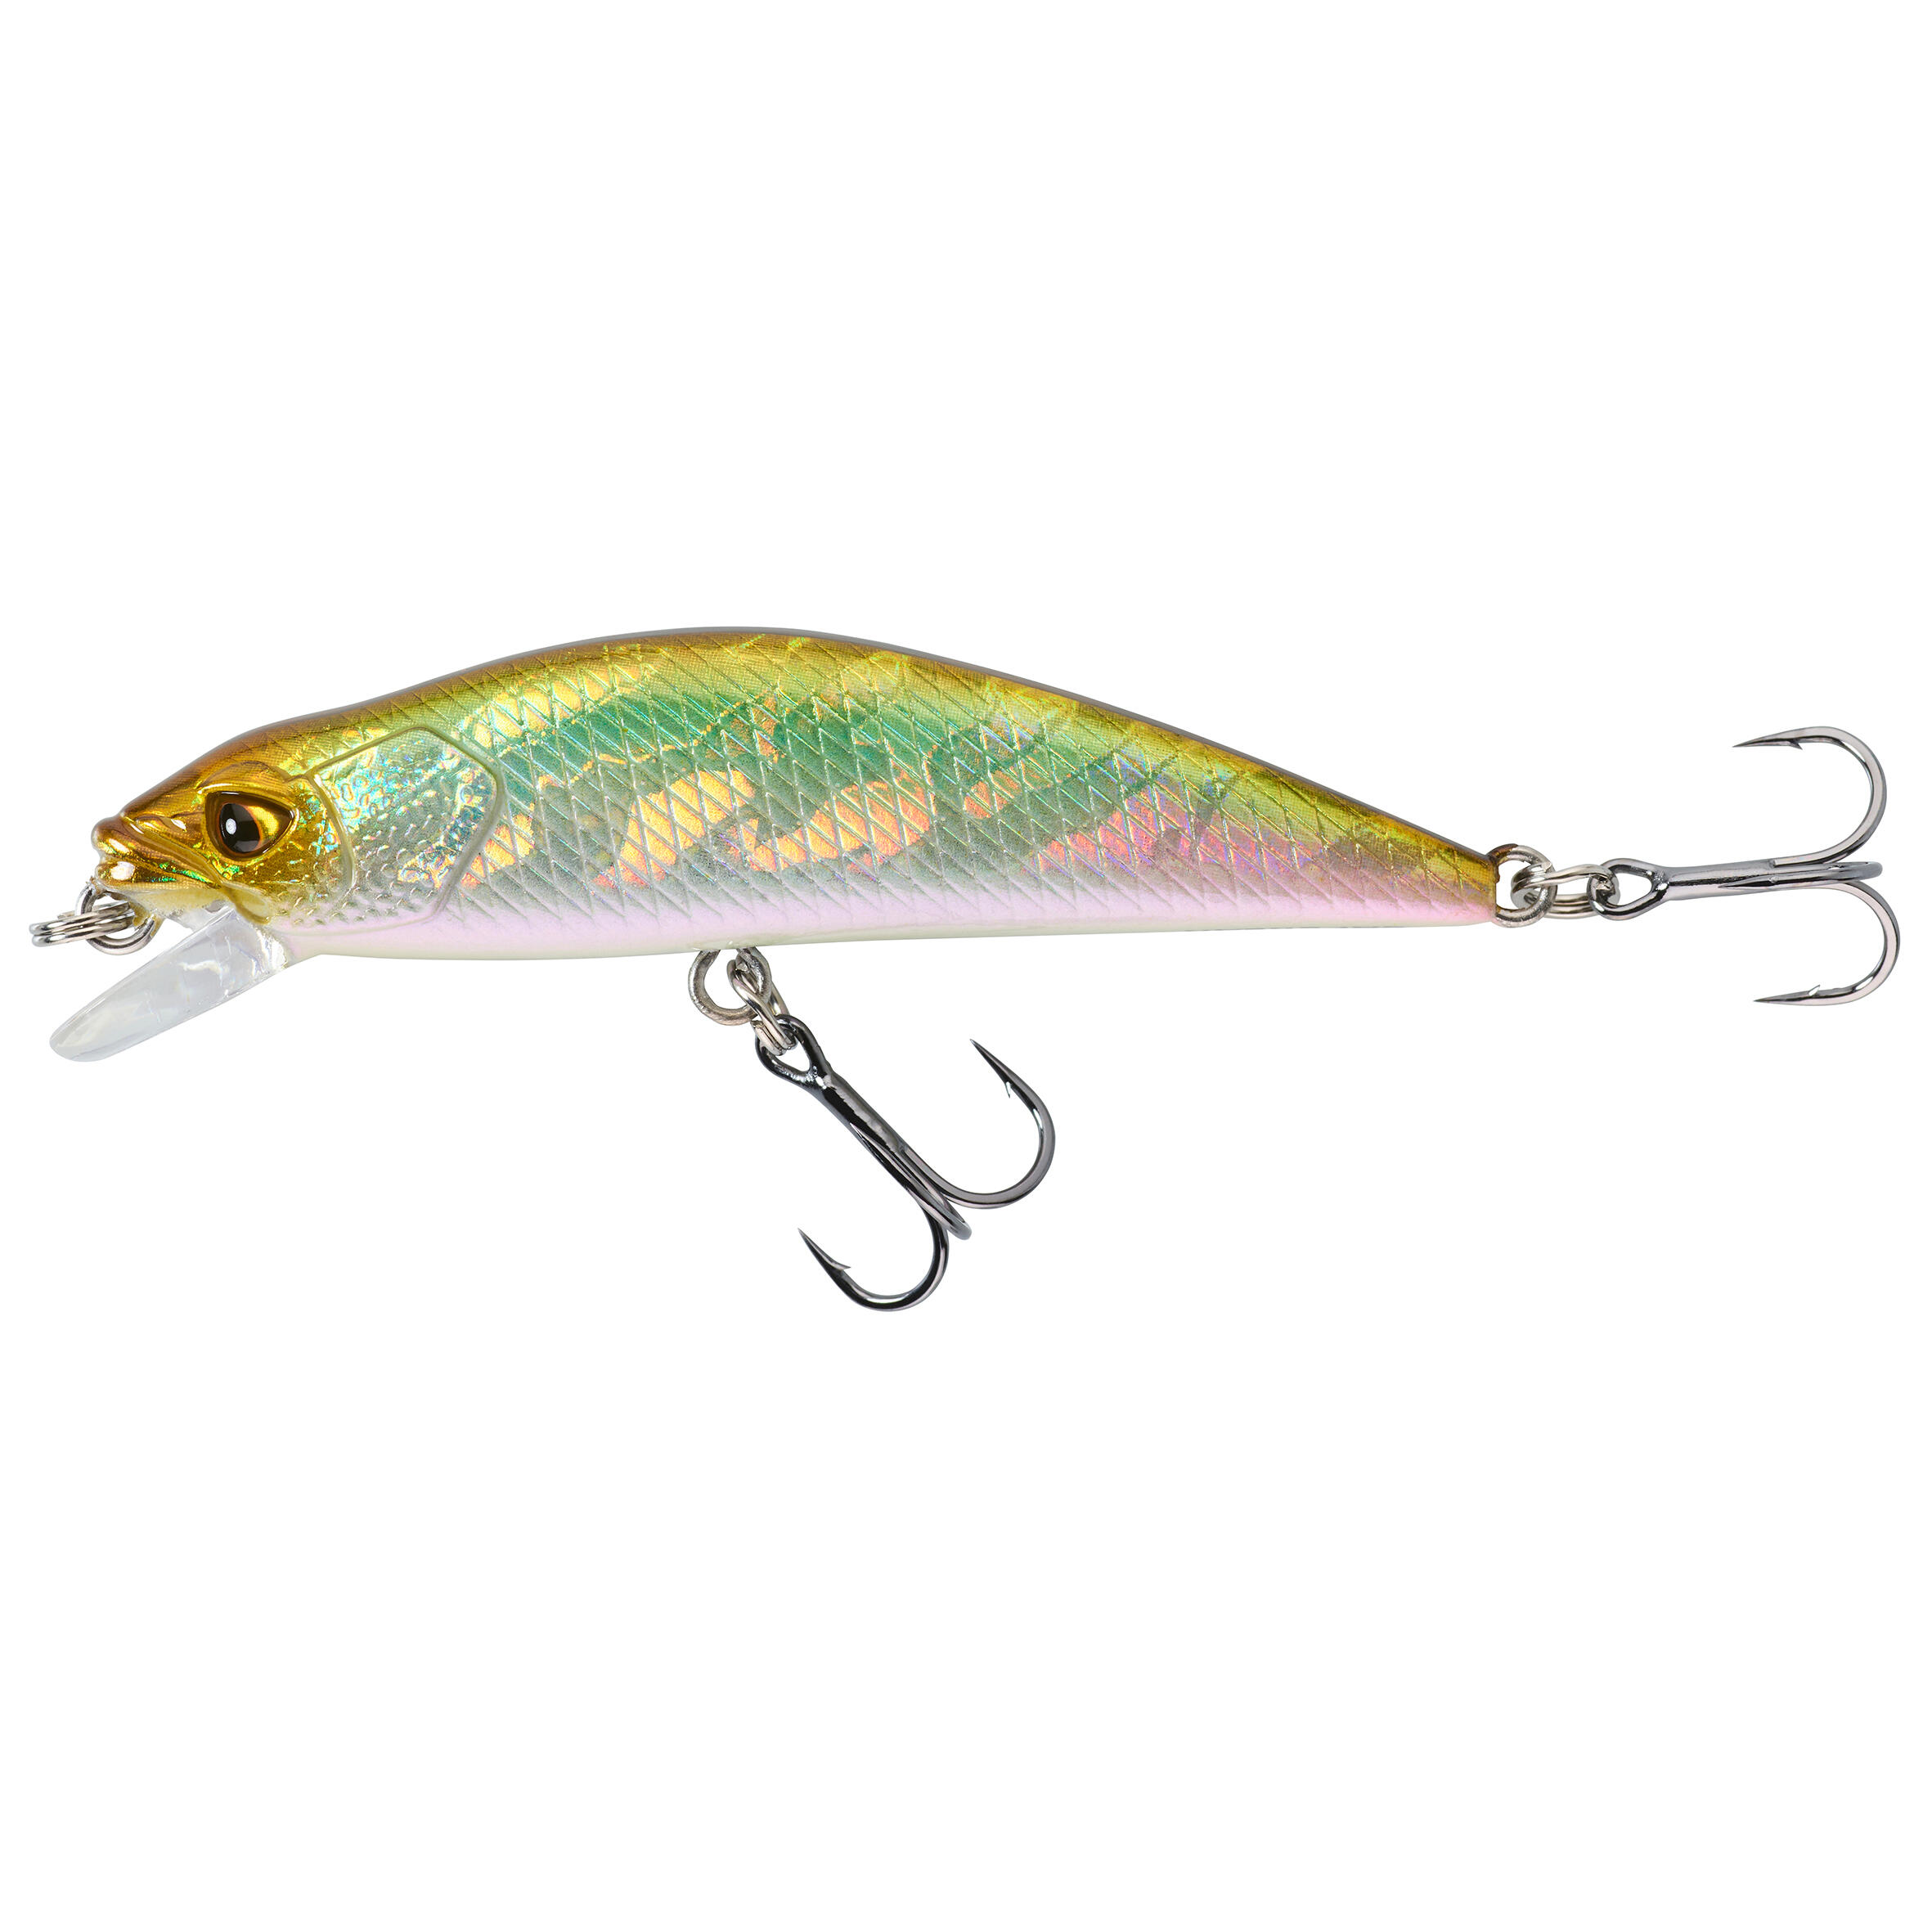 CAPERLAN MINNOW HARD LURE FOR TROUT WXM  MNWFS 50 US - GREEN BACK